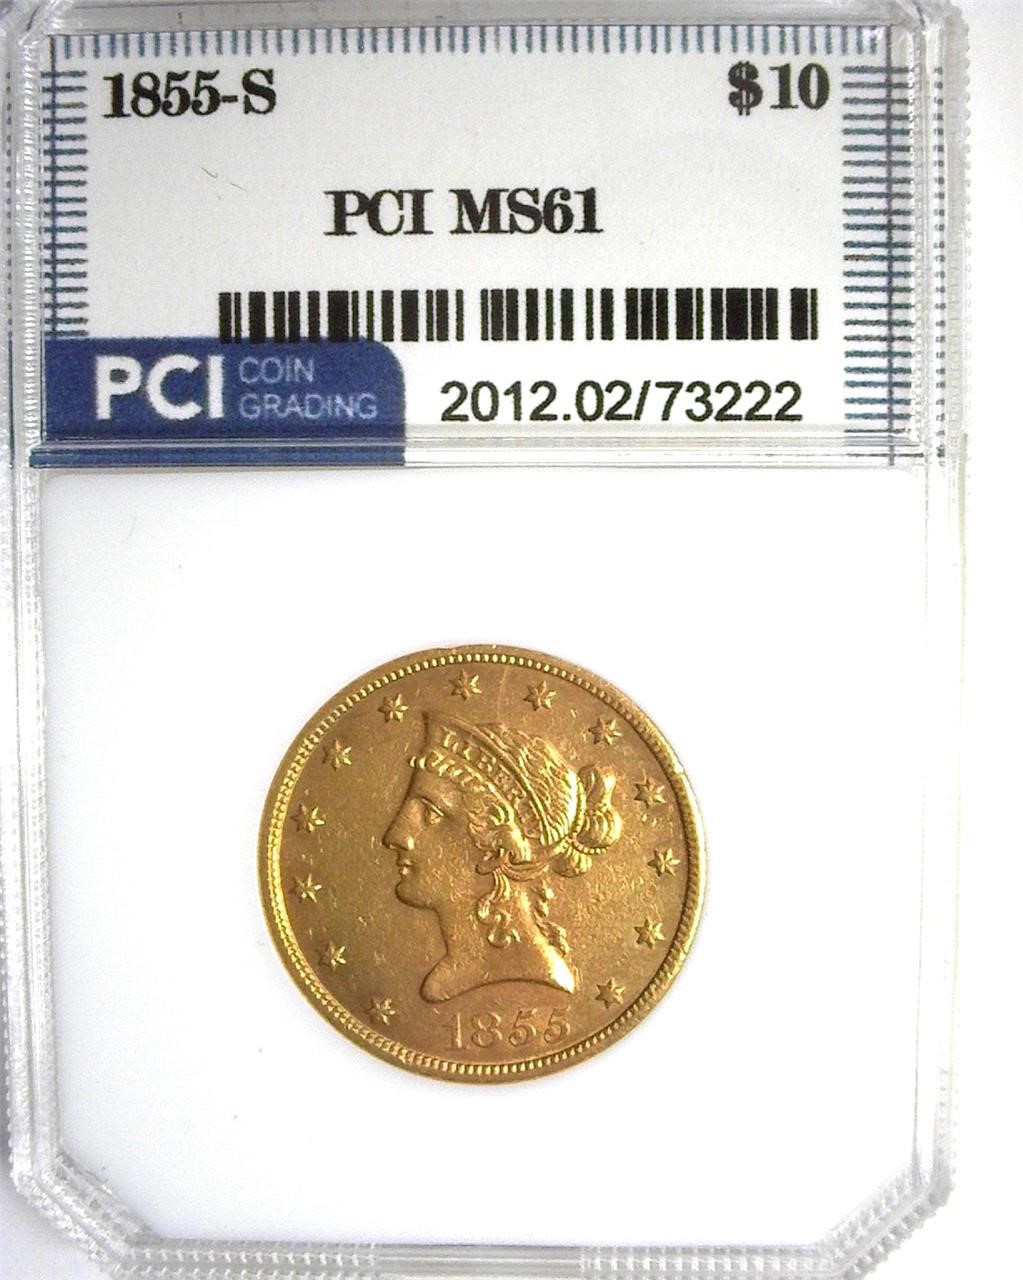 1855-S Gold $10 PCI MS61 60 to 80 Known